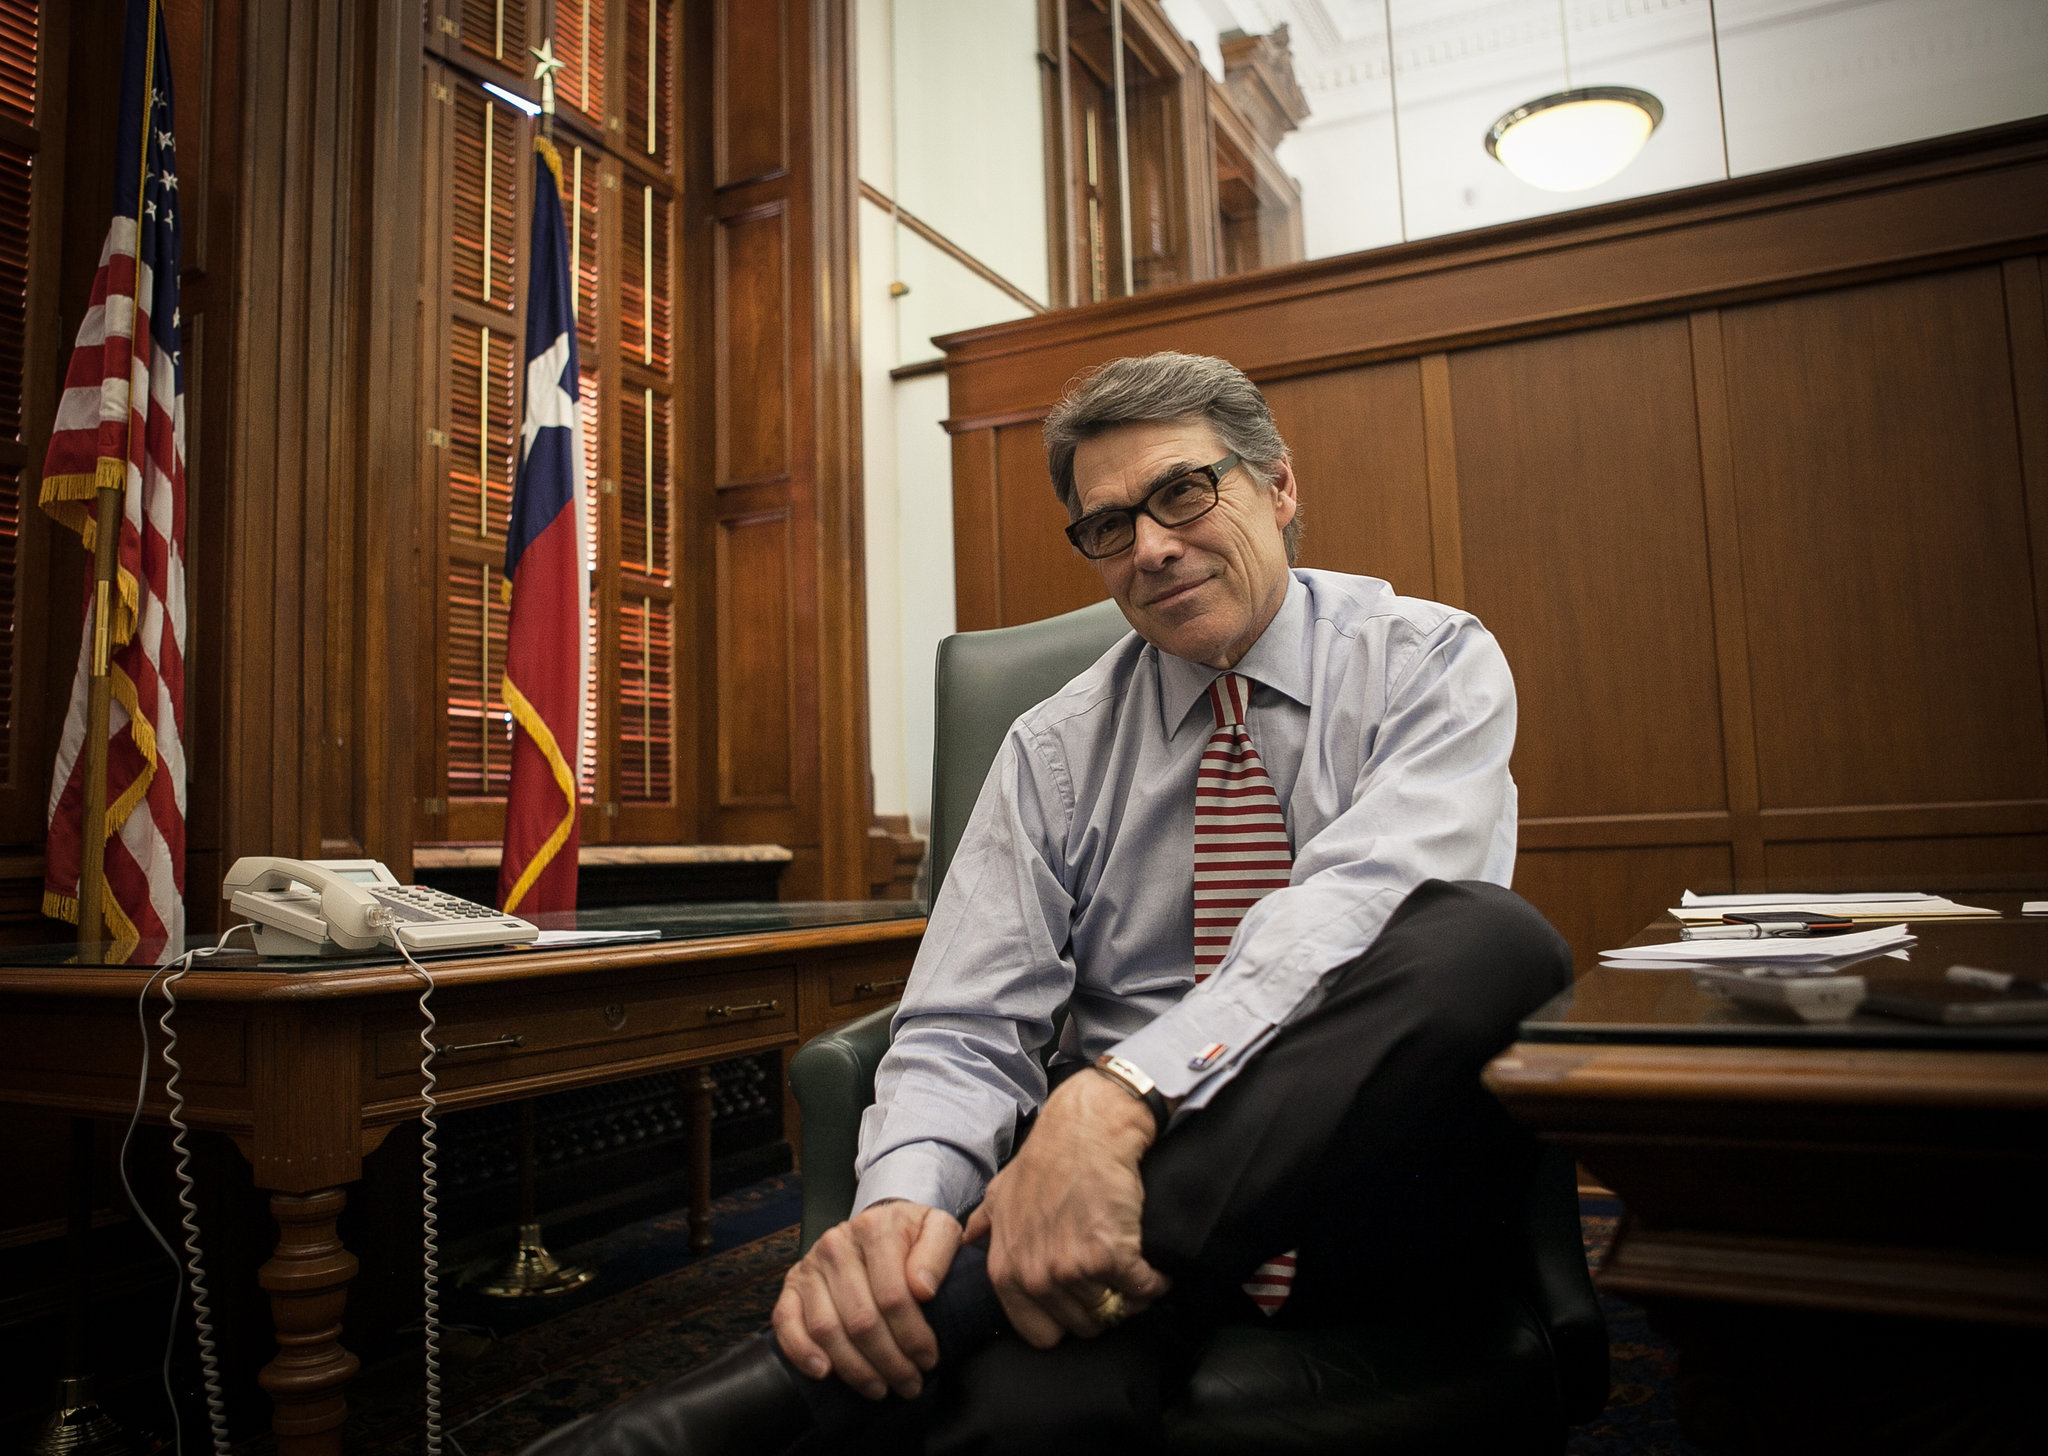 Perry Renews Call For Texas To Legalize Mobile Sports Betting